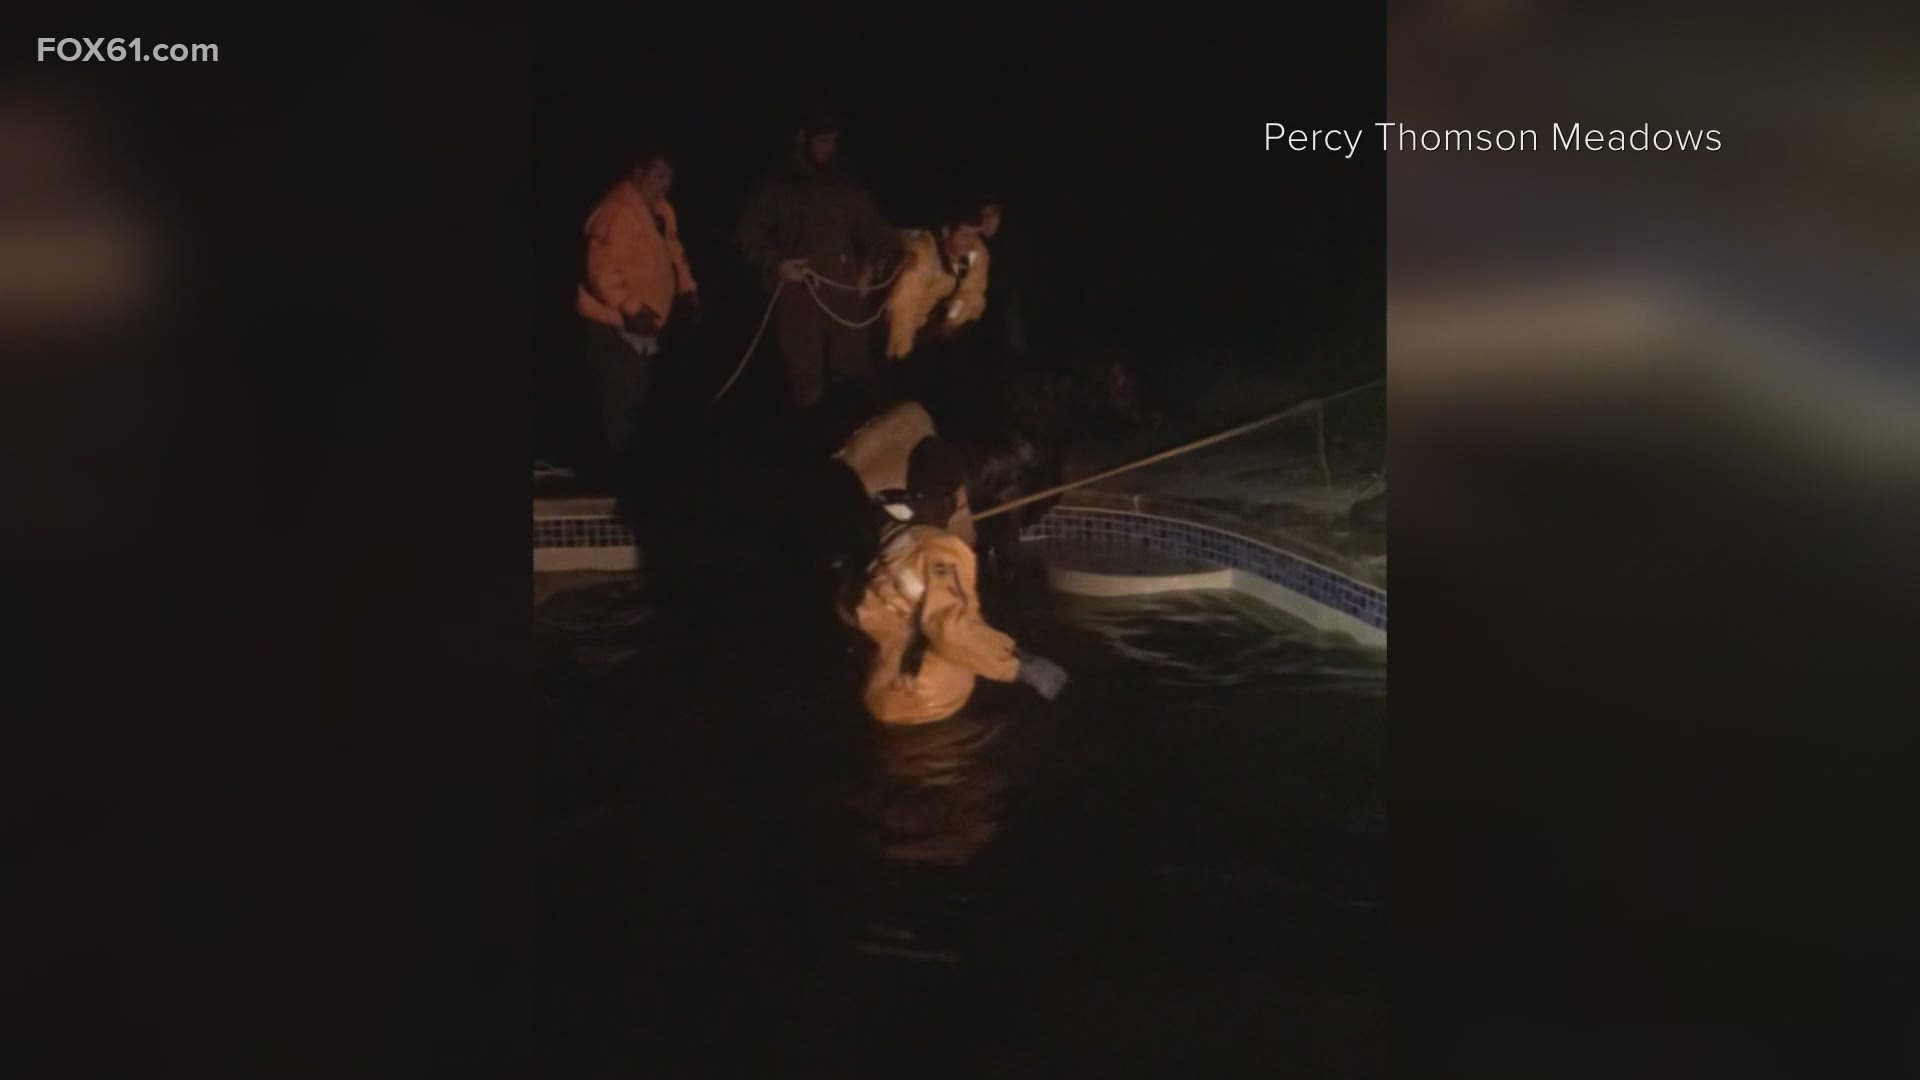 First responders donned their cold water rescue gear and helped the animal swim to shallow waters